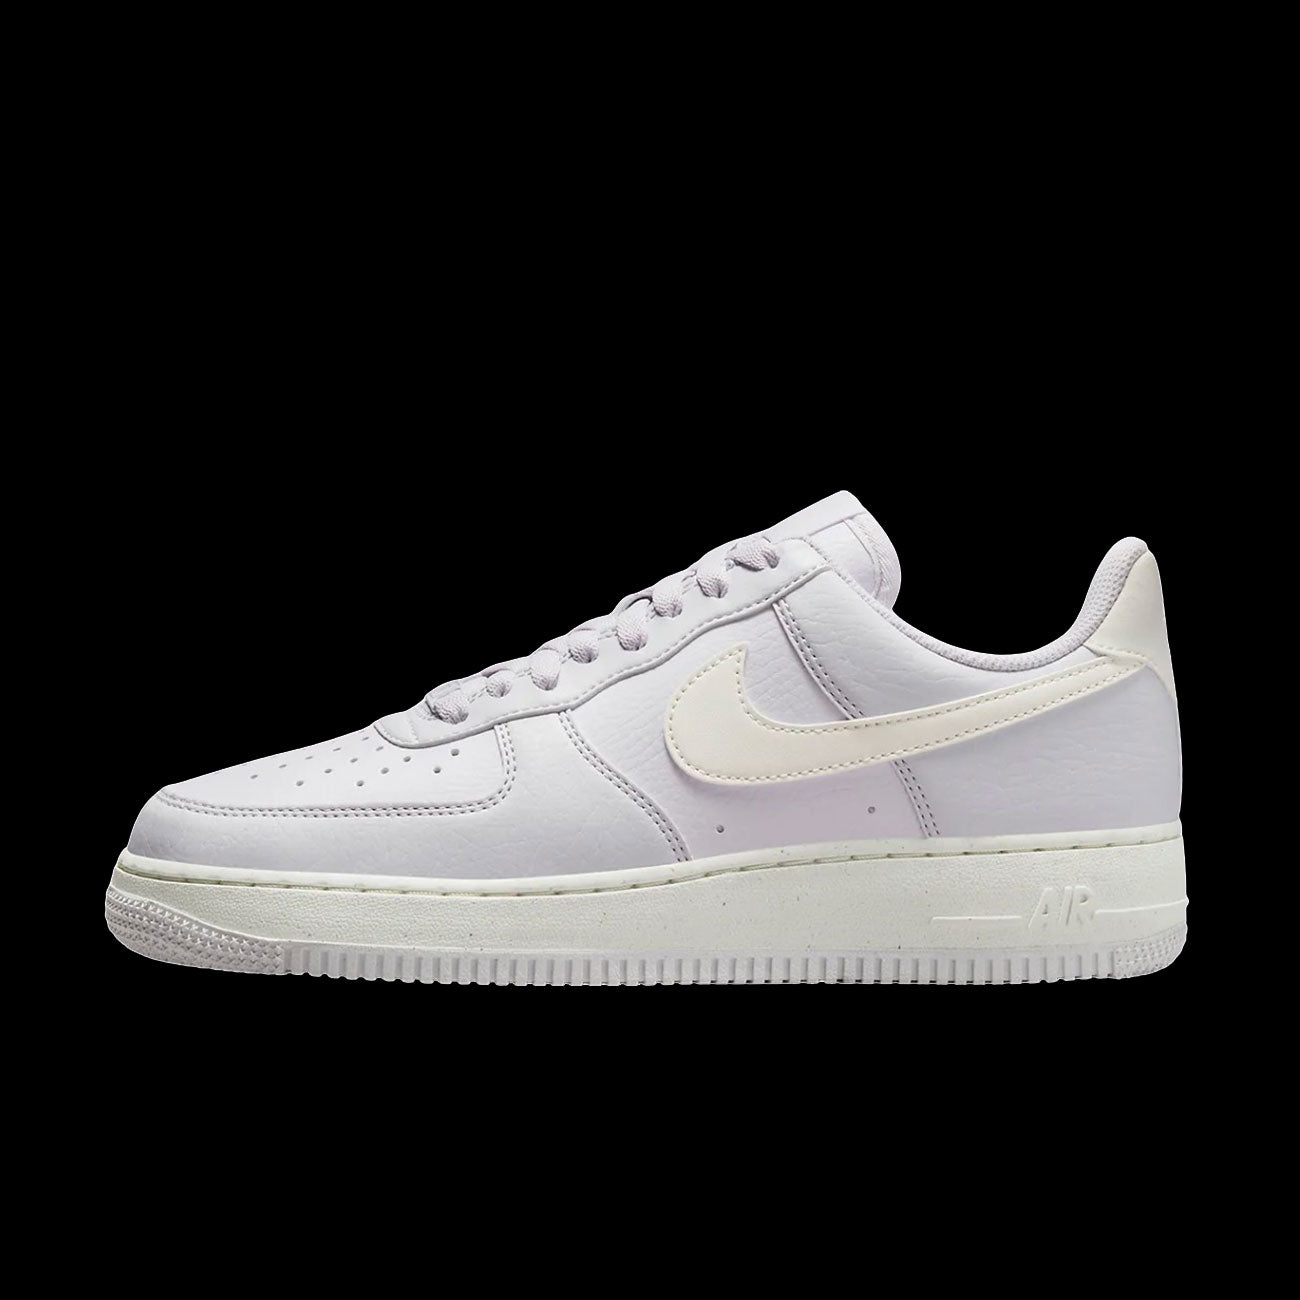 Nike Air Force 1 Low White Barely Grape (Women's)